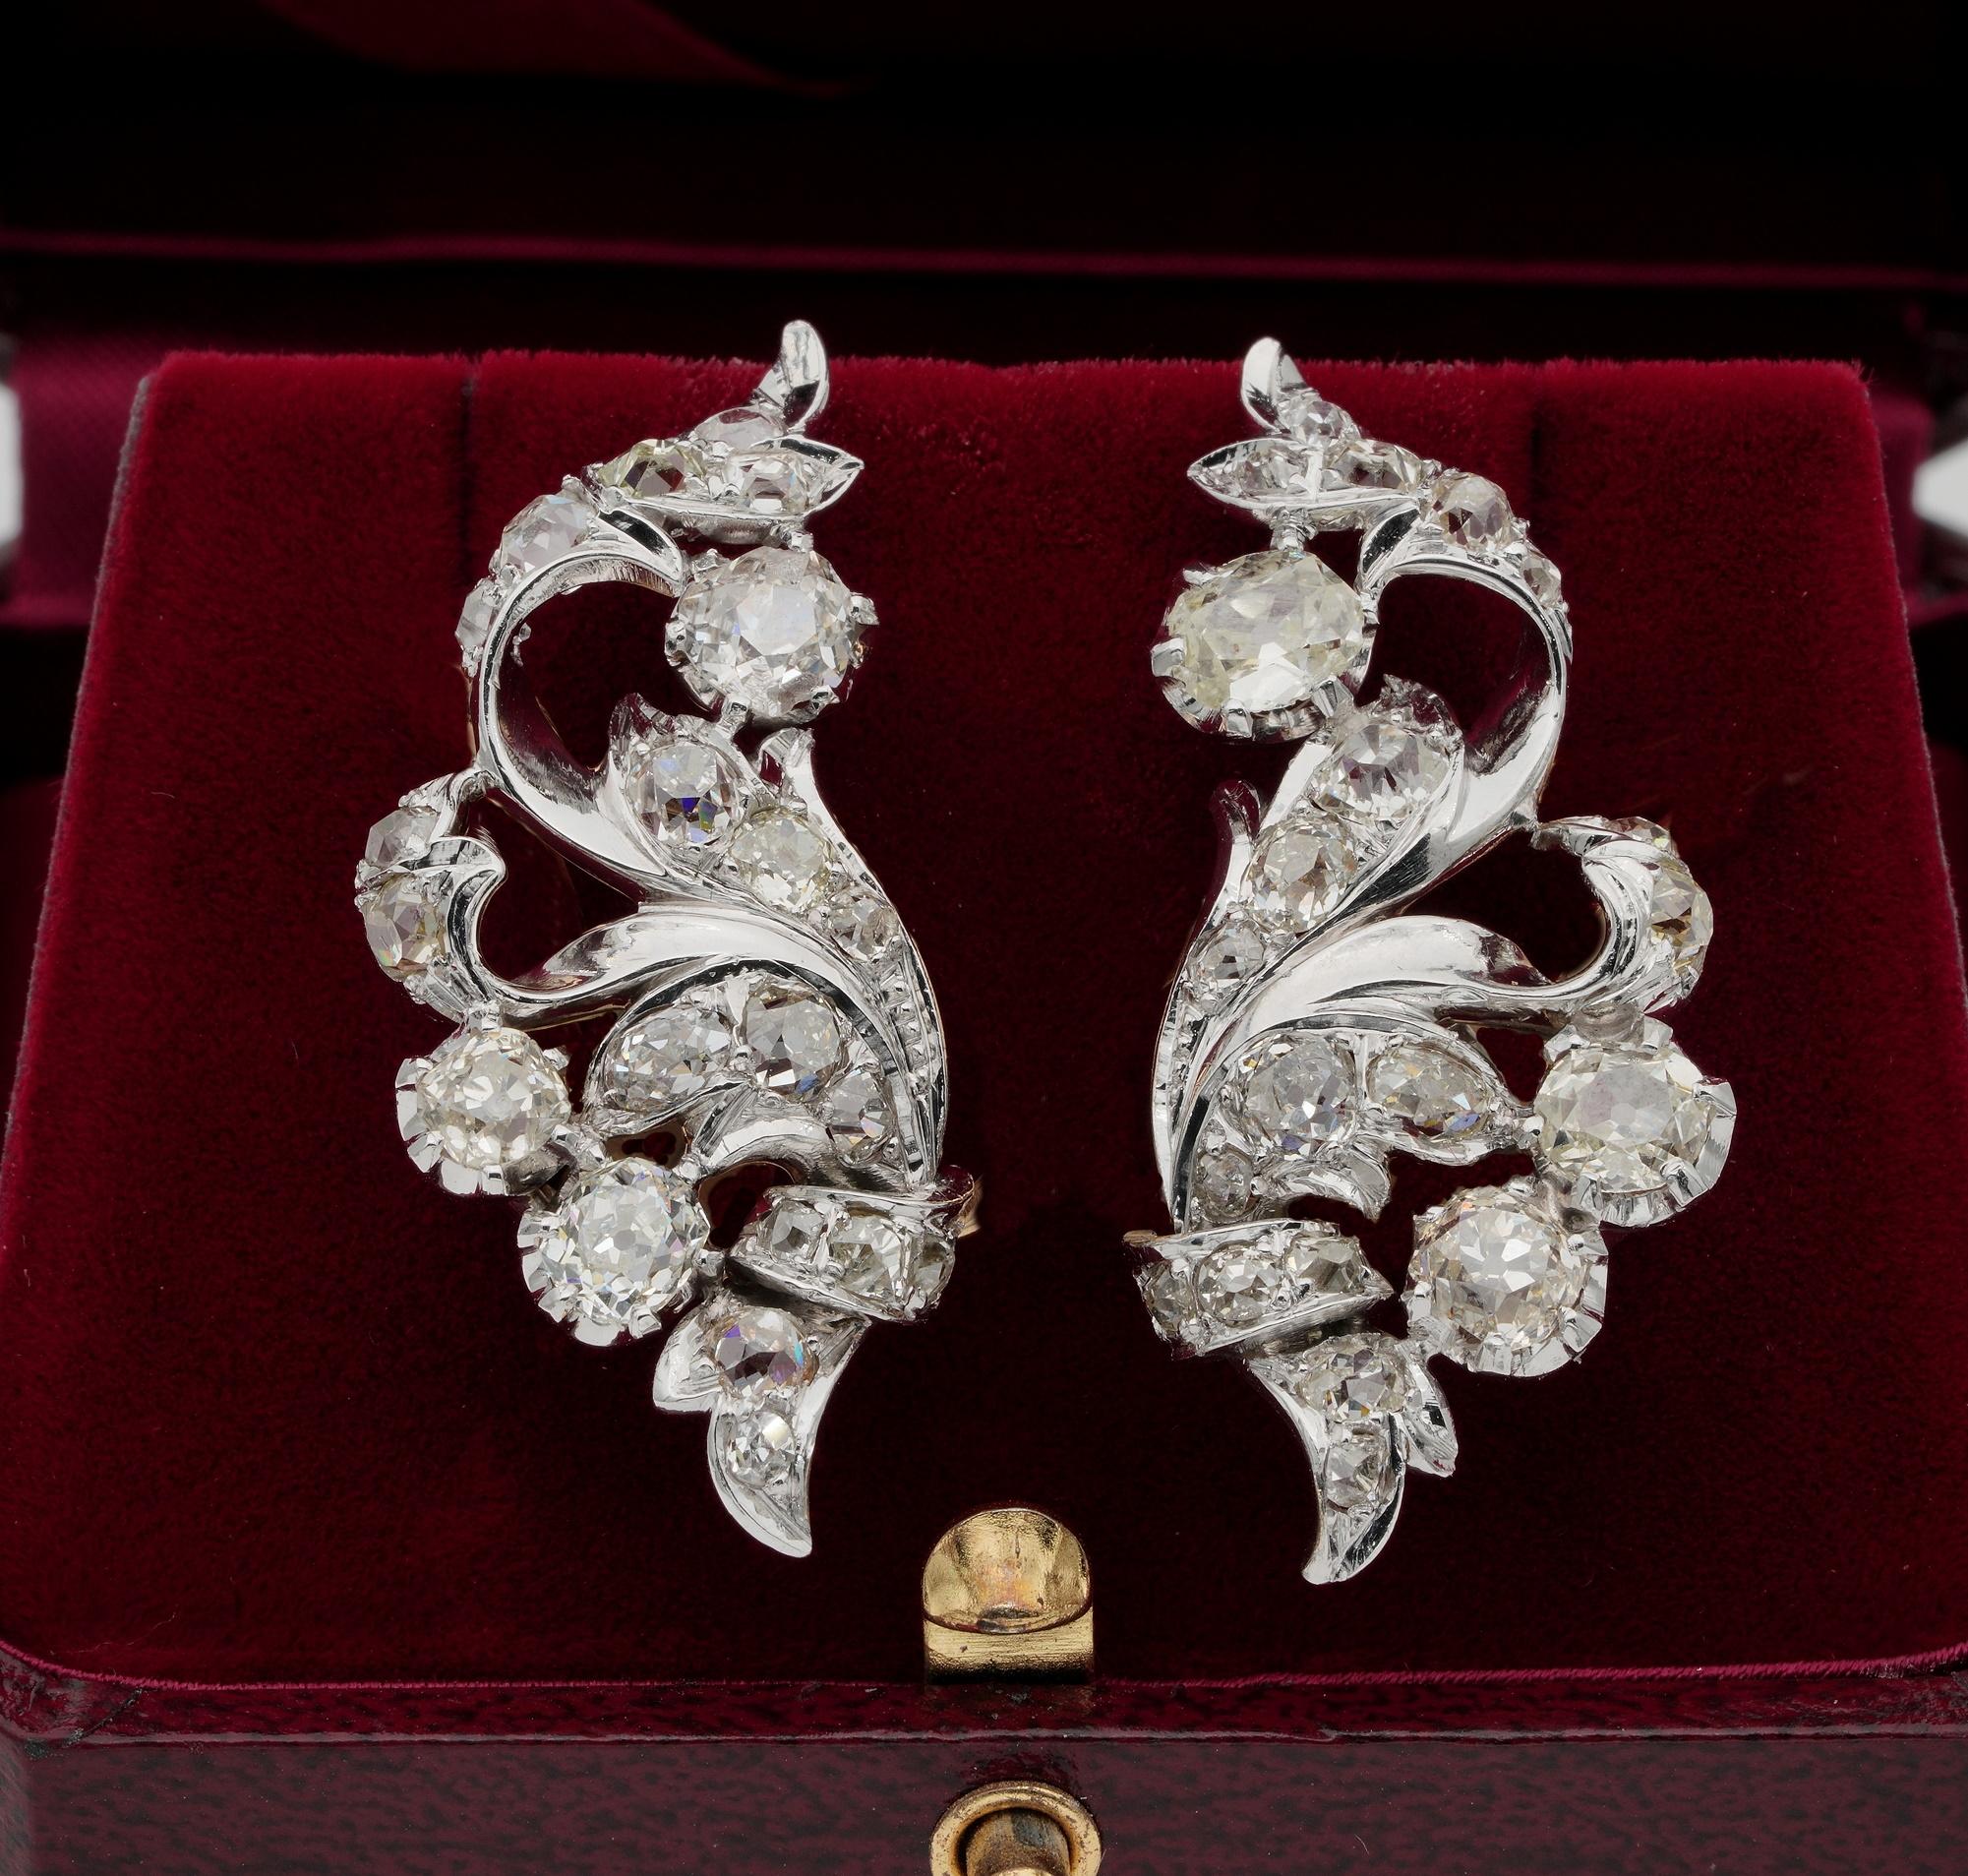 Be a Hollywood Star!

These outstanding, original Art Deco earrings are the epitome of eternal elegance, stepping back into history, prized antique workmanship, opulence of old cut Diamonds set, Platinum, exclusive design, quite a one off pair of